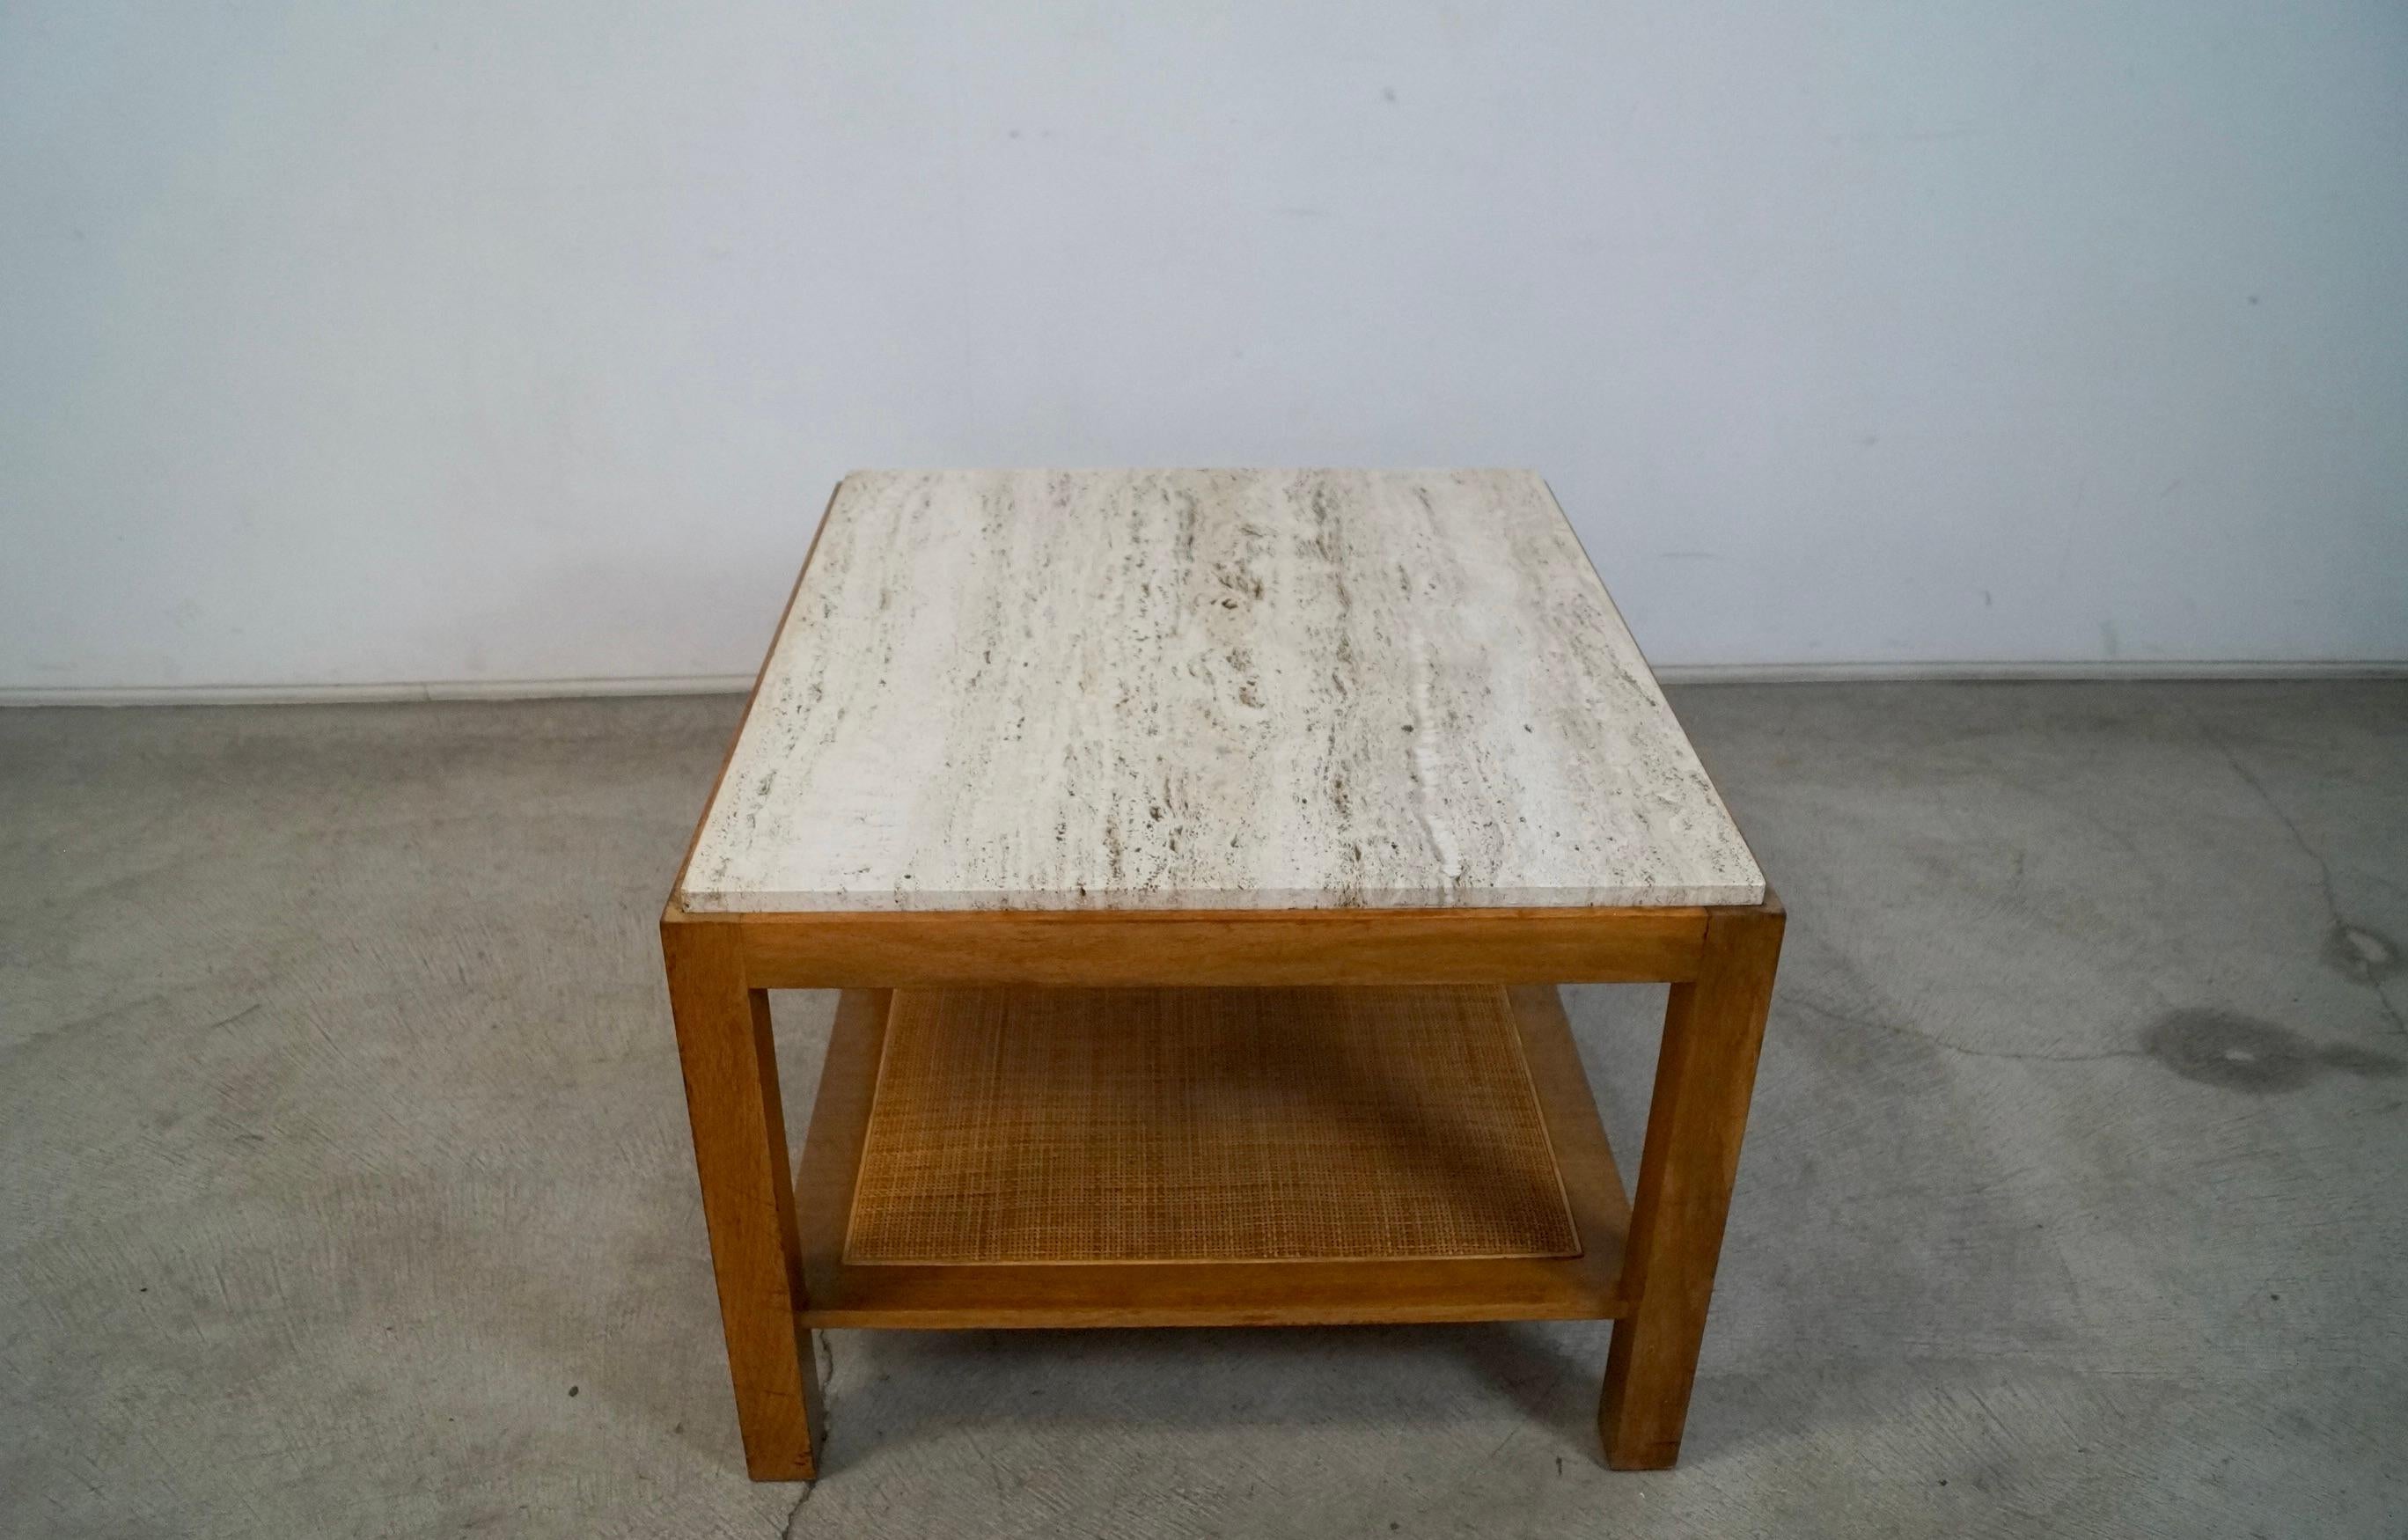 1960's Mid-Century Modern Edward Wormley Style End Table In Good Condition For Sale In Burbank, CA